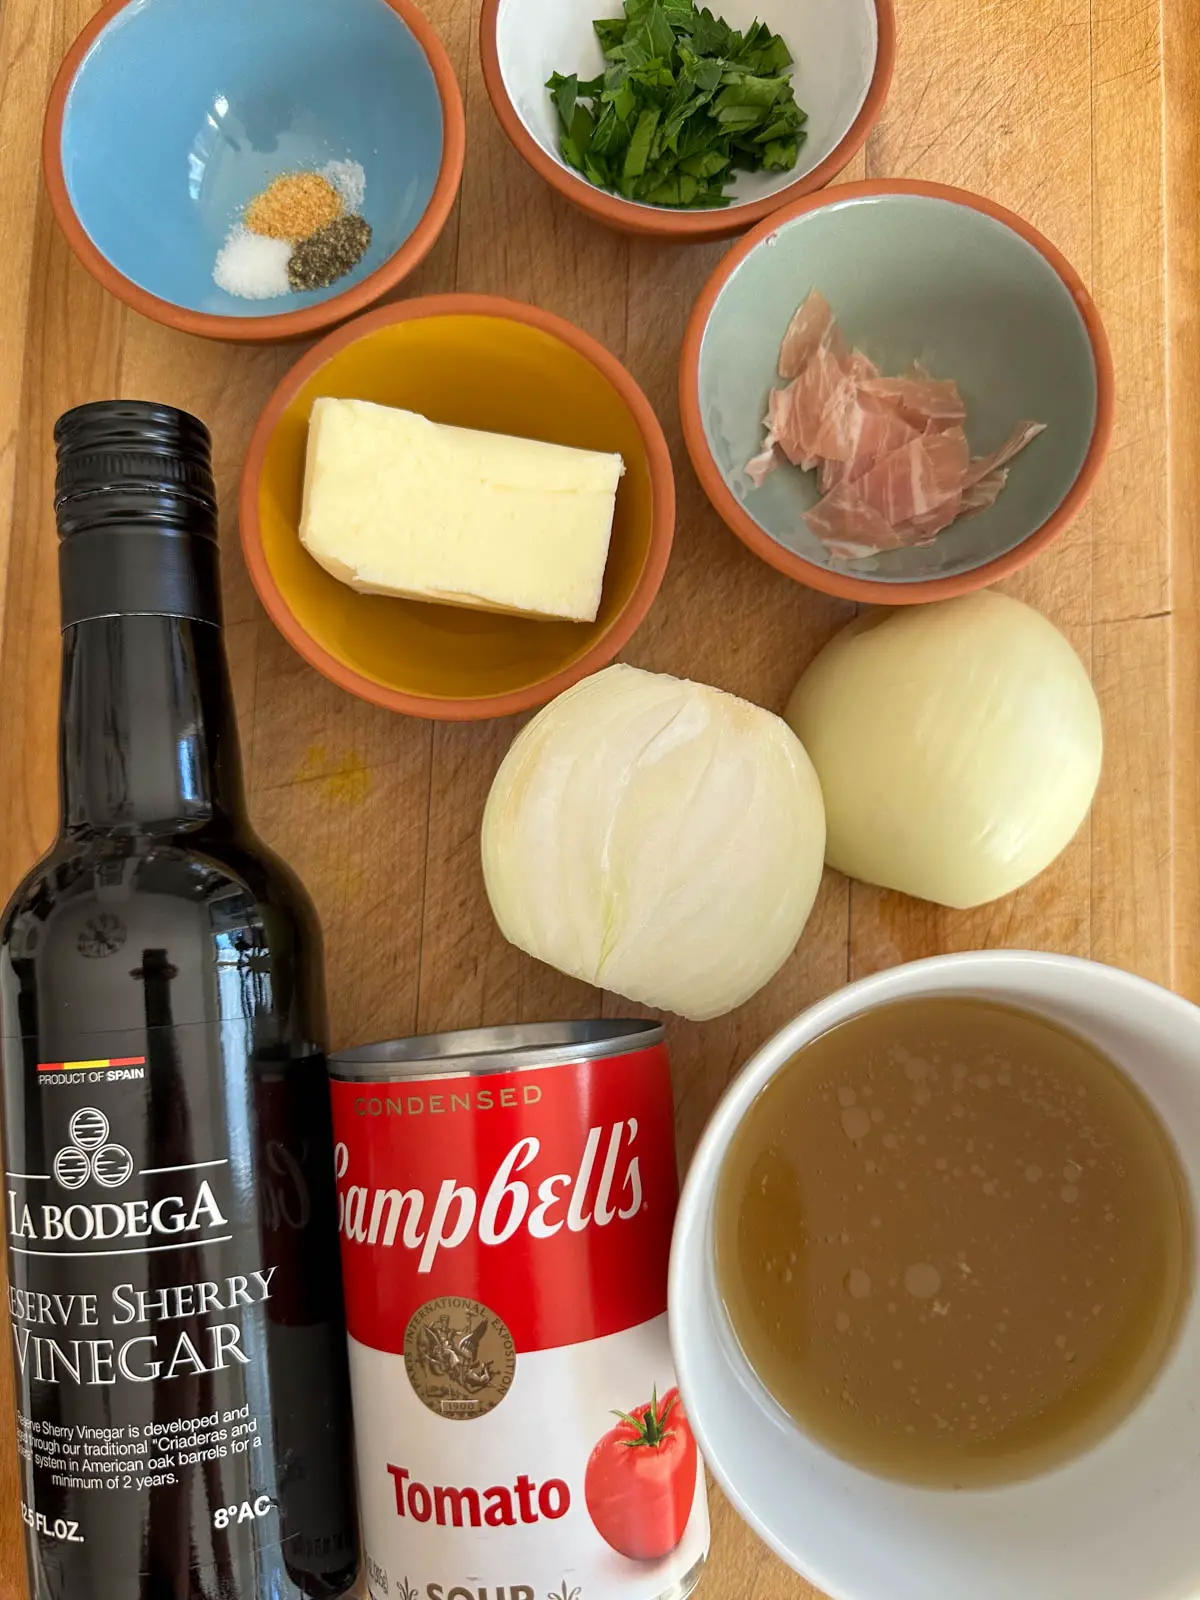 A can of Campbell's Tomato soup, a white bowl with chicken broth, a bottle of sherry vinegar, 2 onion halves, and small bowls containing butter, seasonings, parsley, and prosciutto.